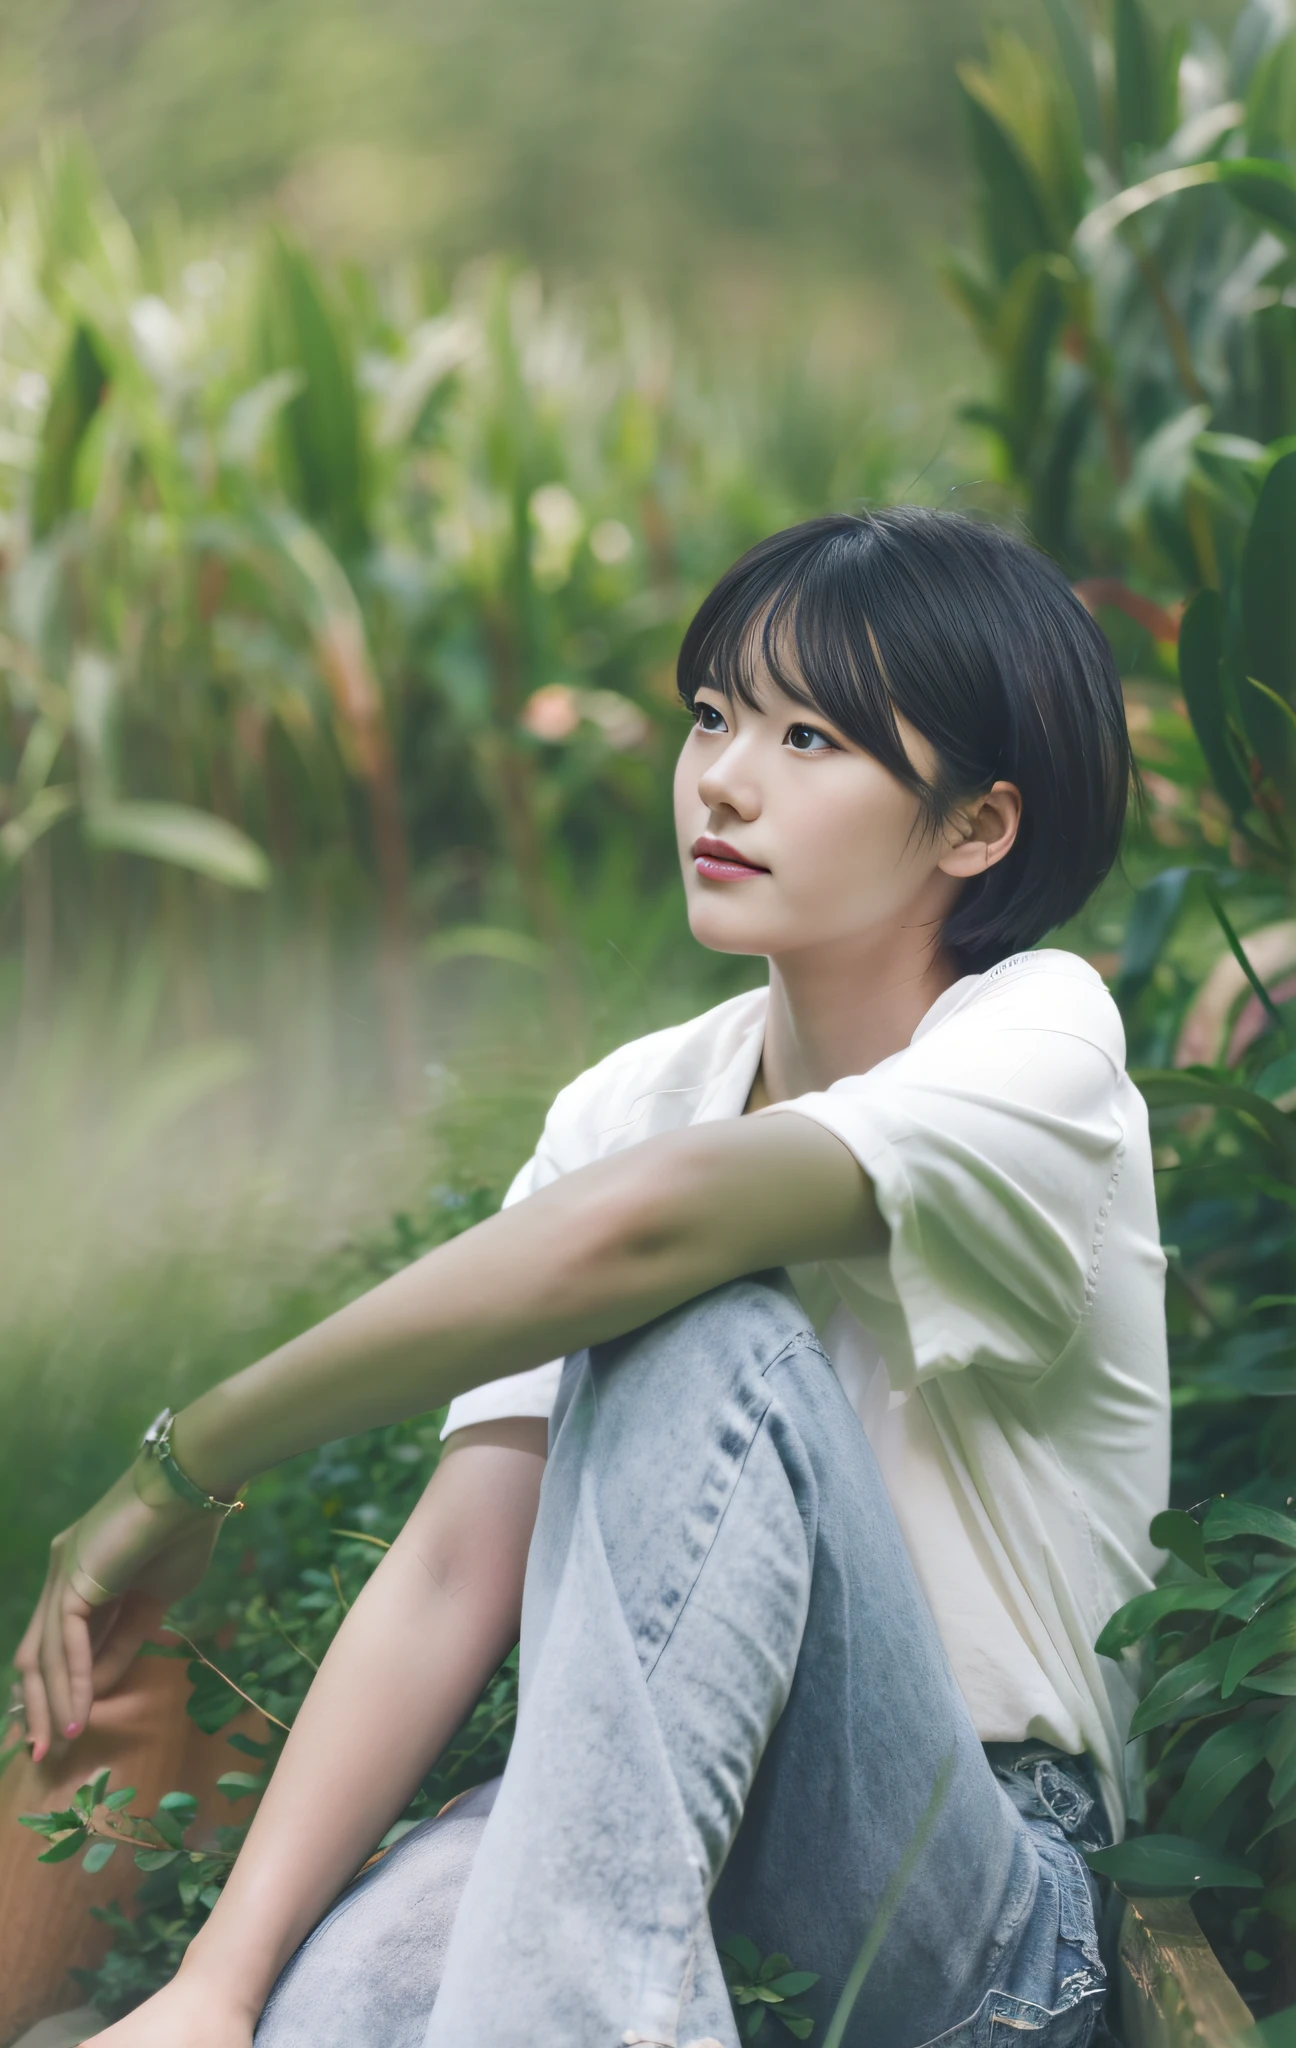 On the grass sat a woman, A young Asian woman, chiho, with short hair, Young Asian woman, photograph of a woman, side portrait imagery, sitting in a field, in the middle of nature, lofi portrait, portrait of a japanese teen, photo of young woman, girl sitting in a flower field, sat on the ground